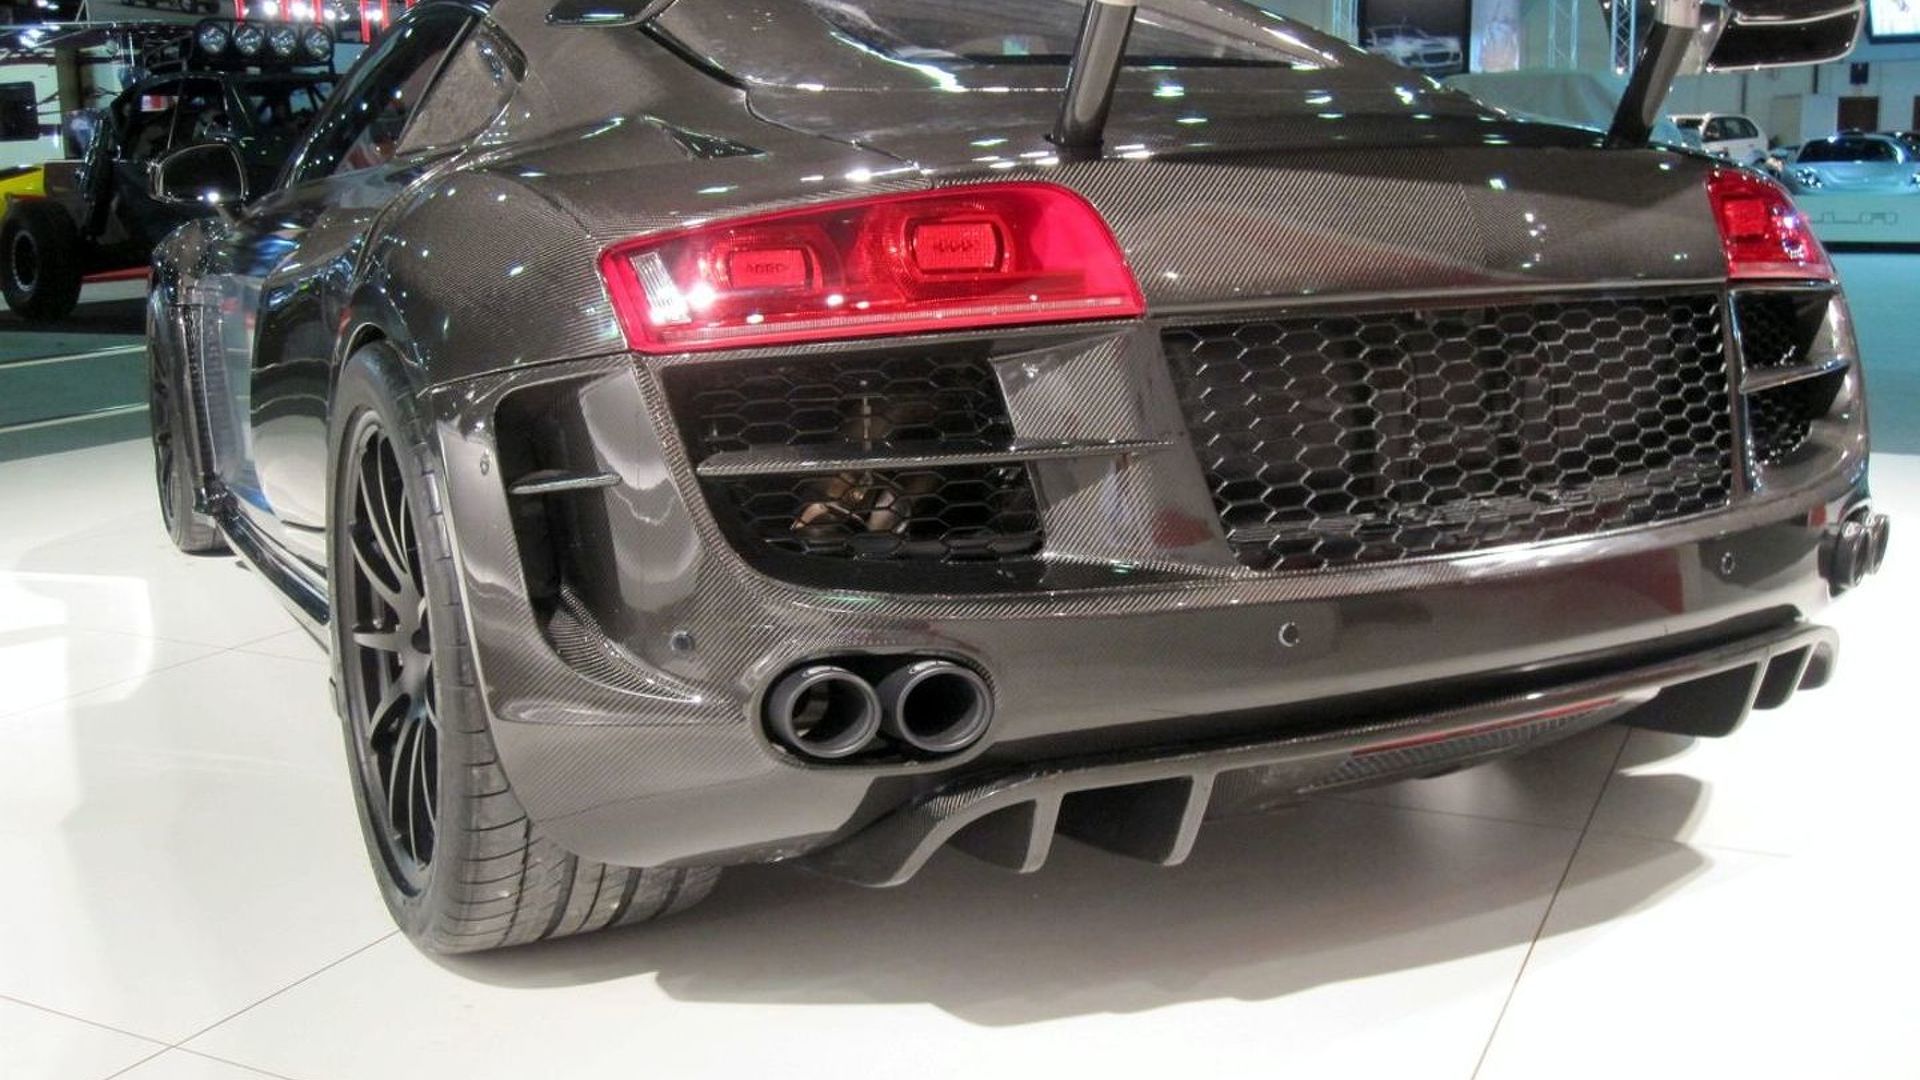 Ppi Razor Gtr With Visible Carbon Fiber Widebody Package Shown In